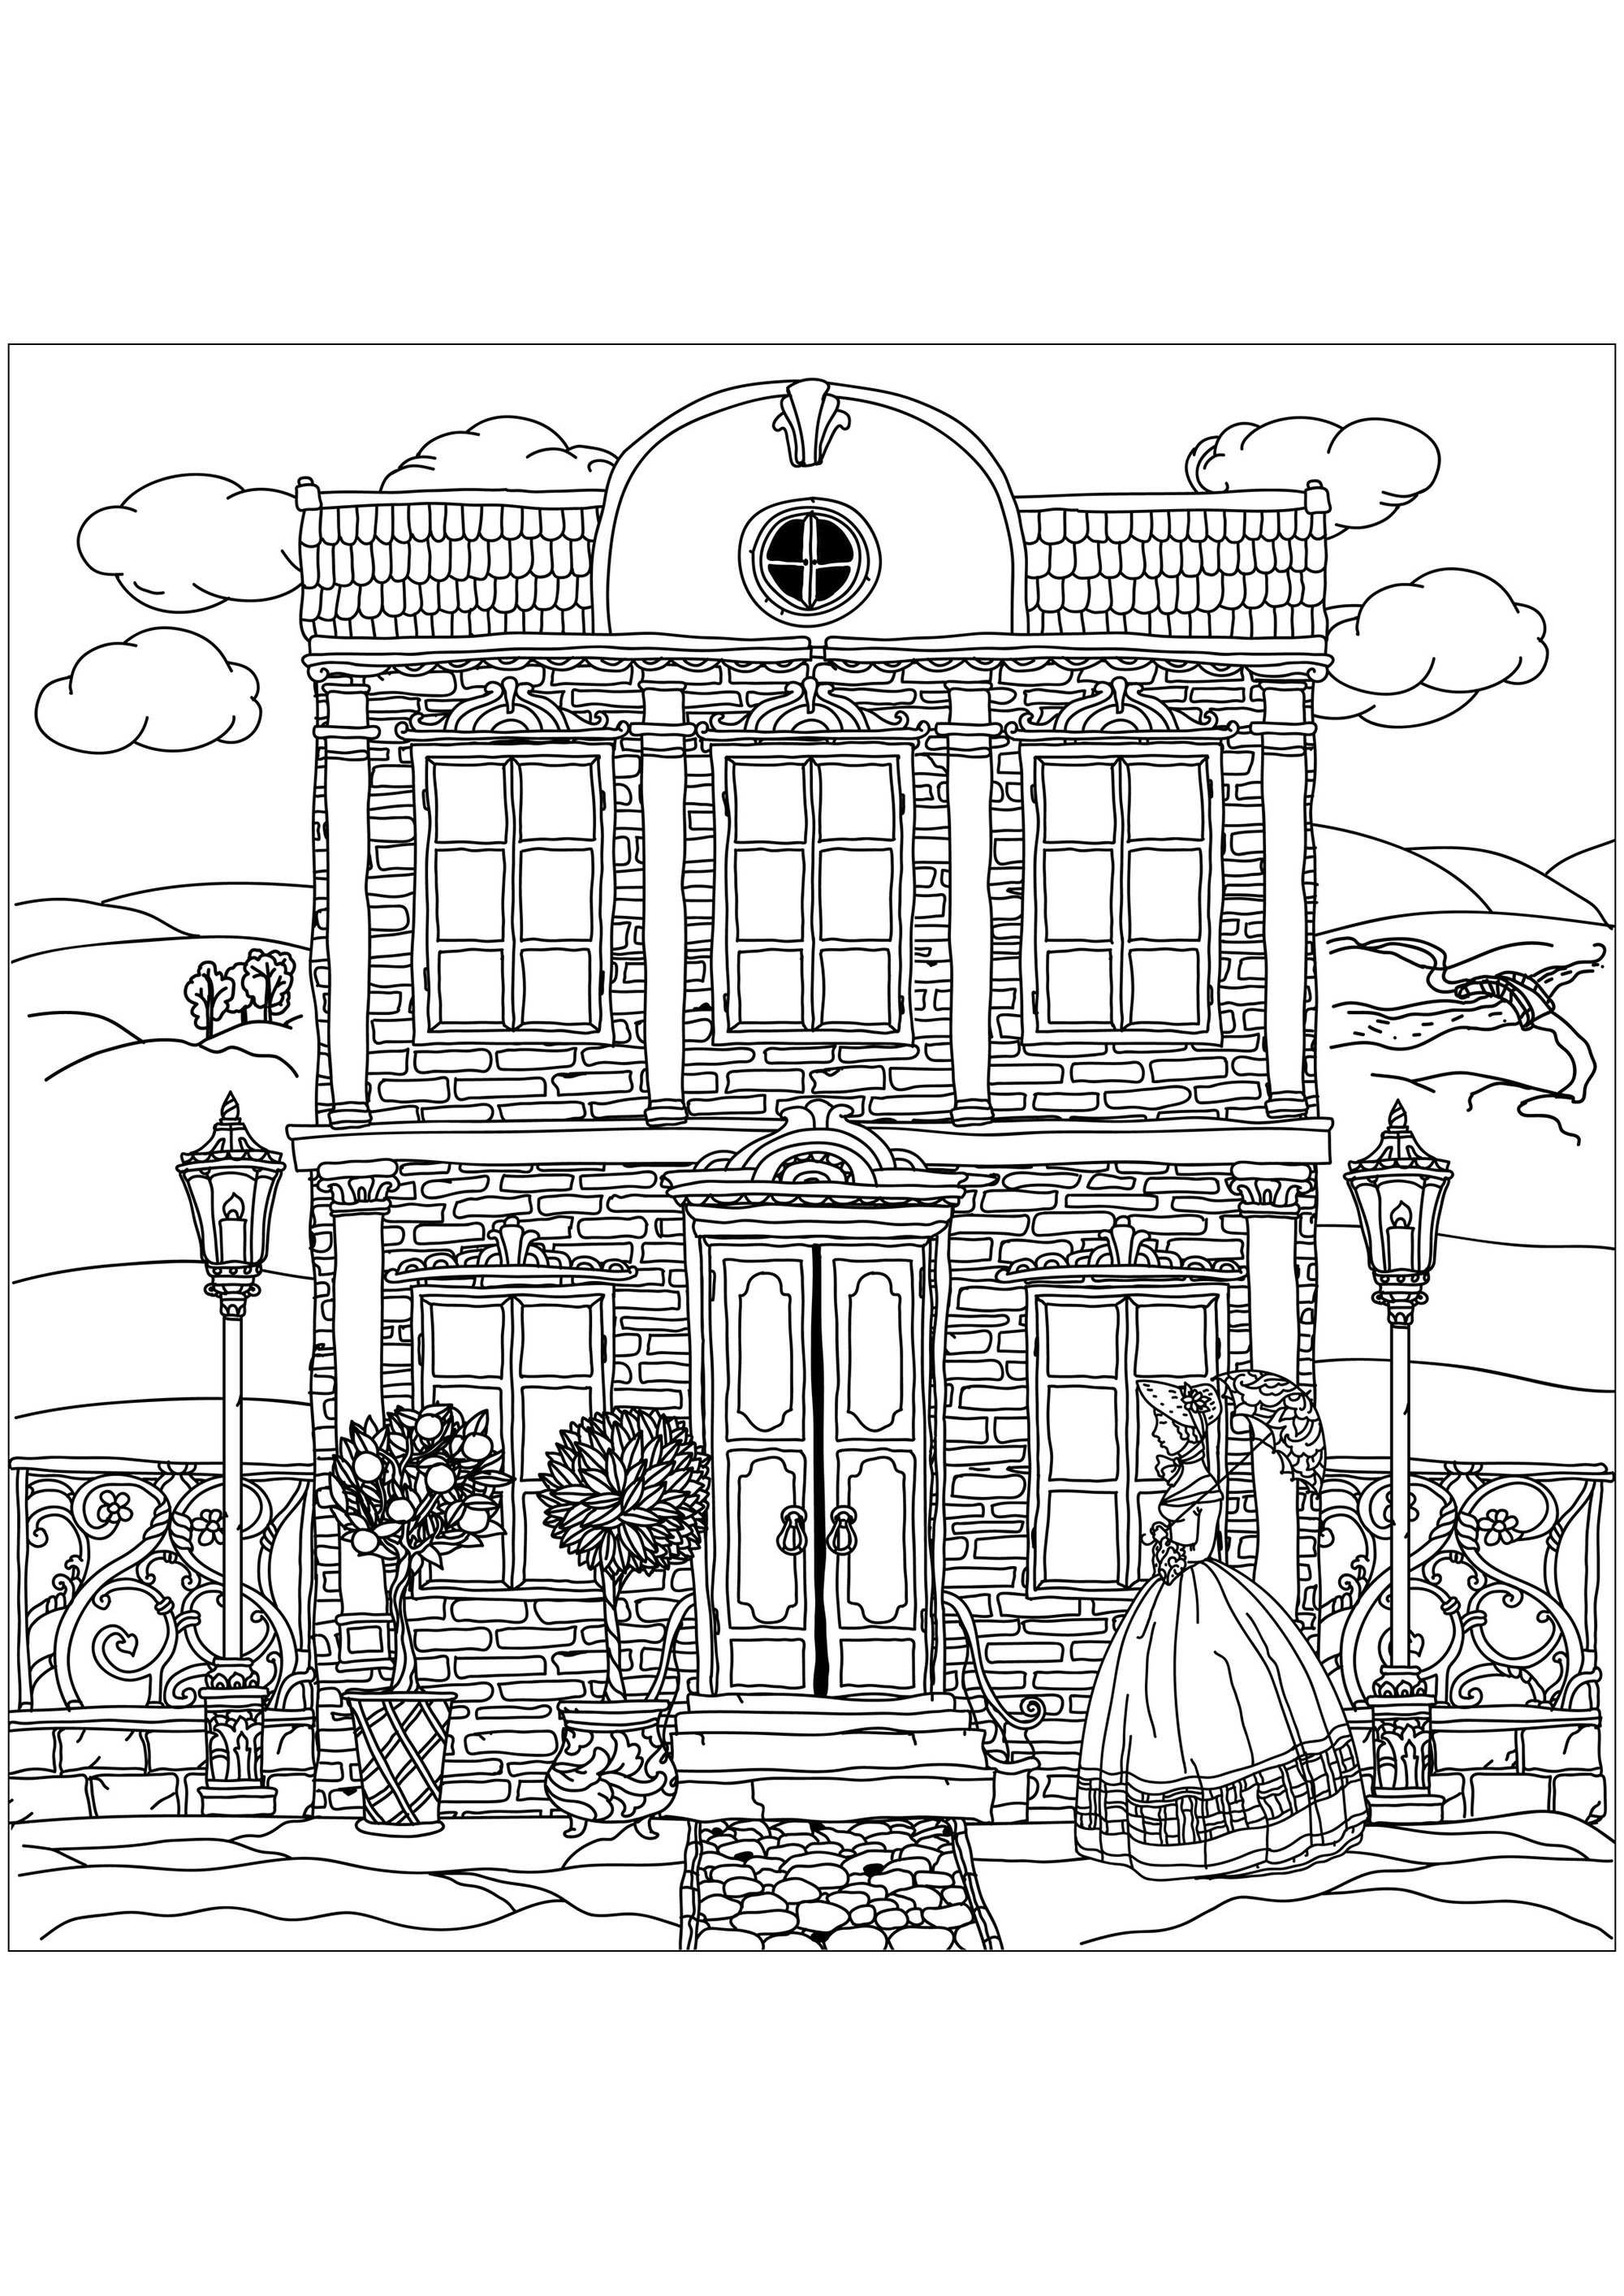 Victorian house and young woman dressed with the elegance of the time. Travel back in time with this beautiful coloring page!, Source : 123rf   Artist : Mashabr